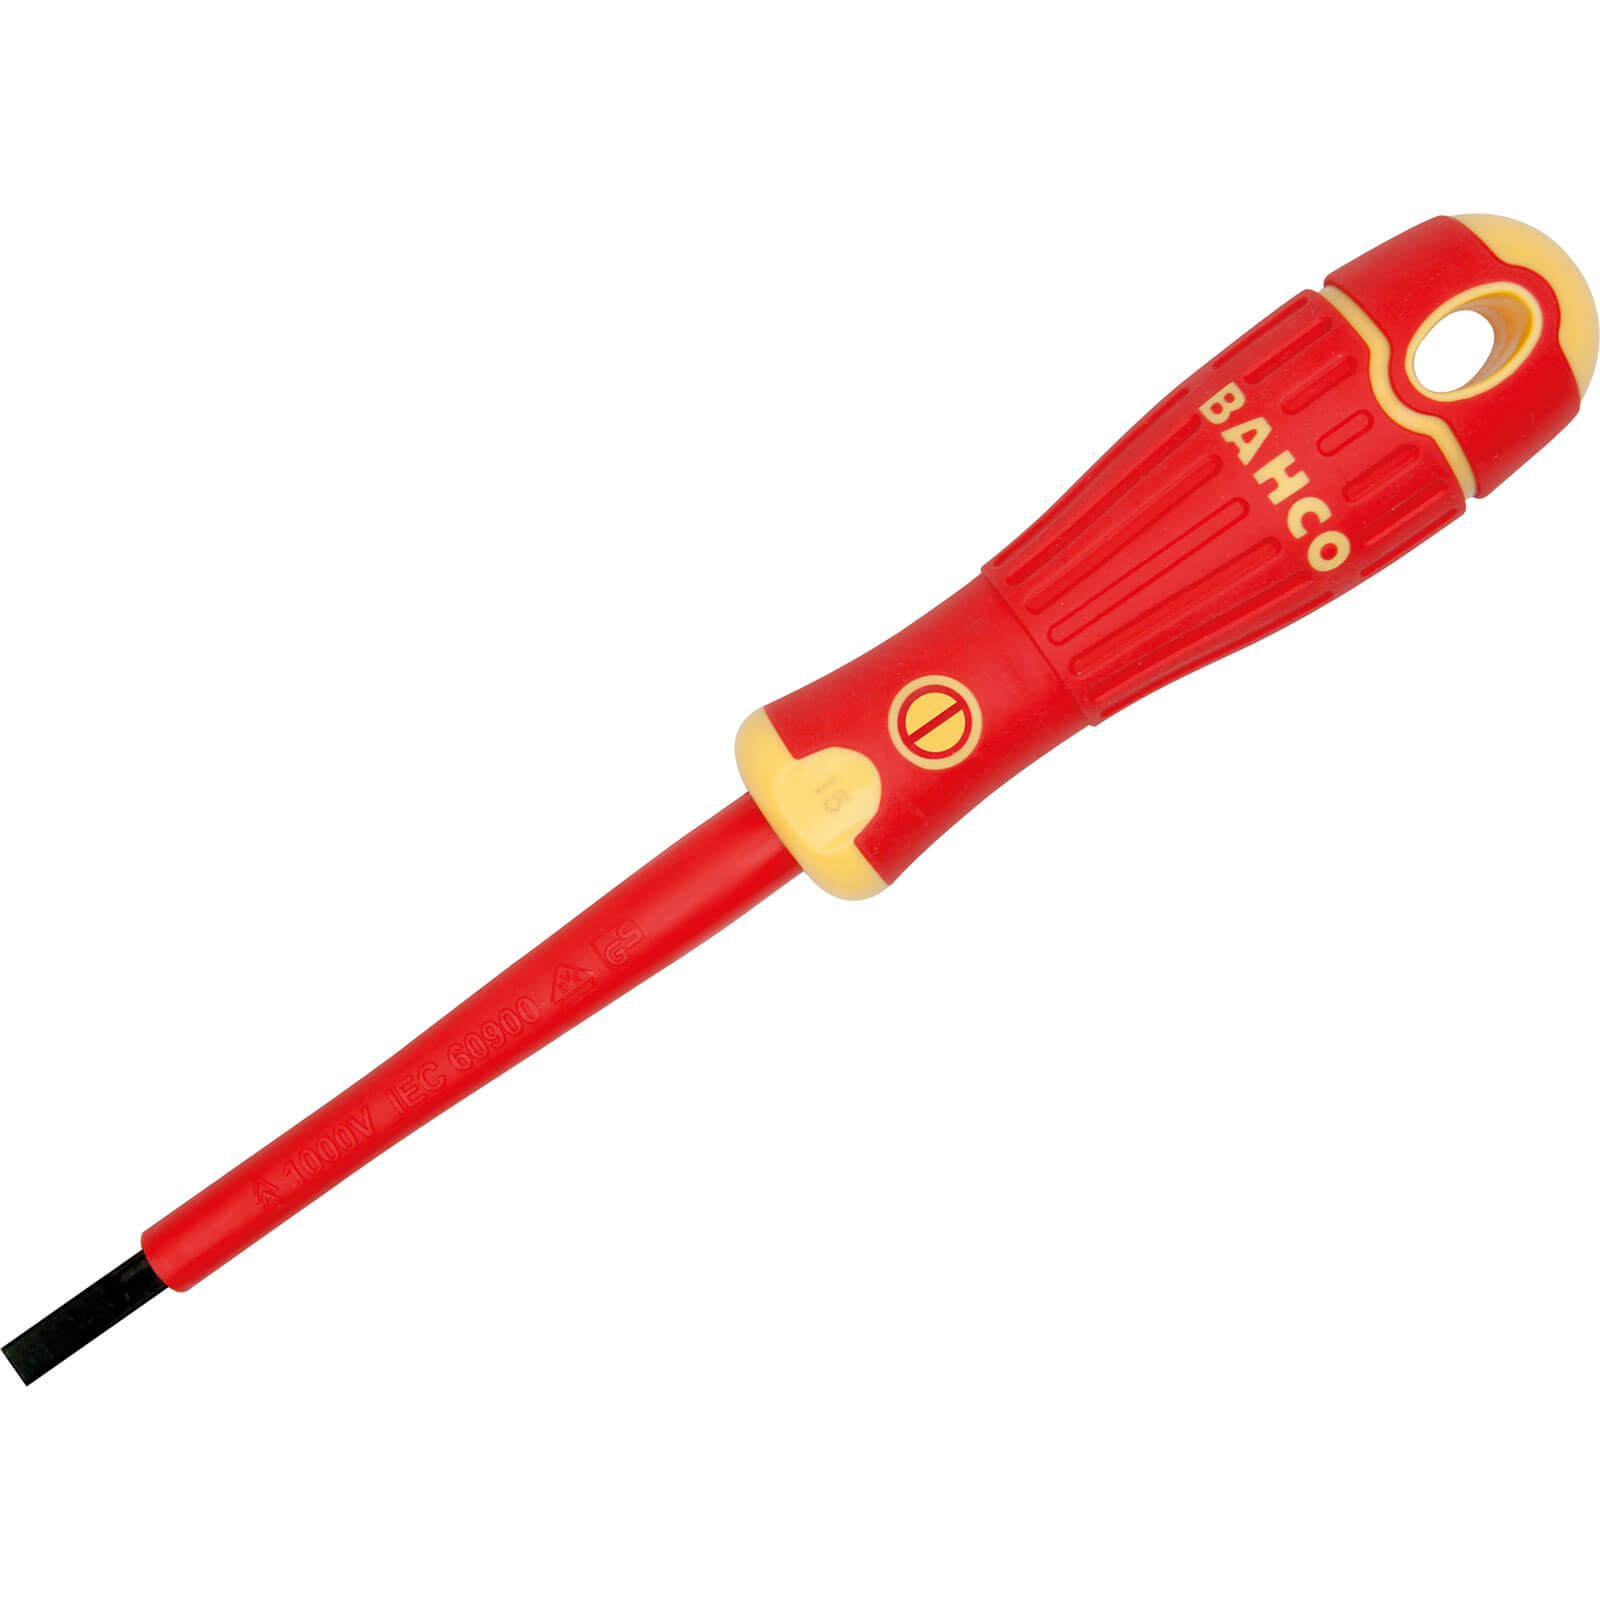 Photo of Bahco Vde Insulated Slotted Screwdriver 4mm 100mm